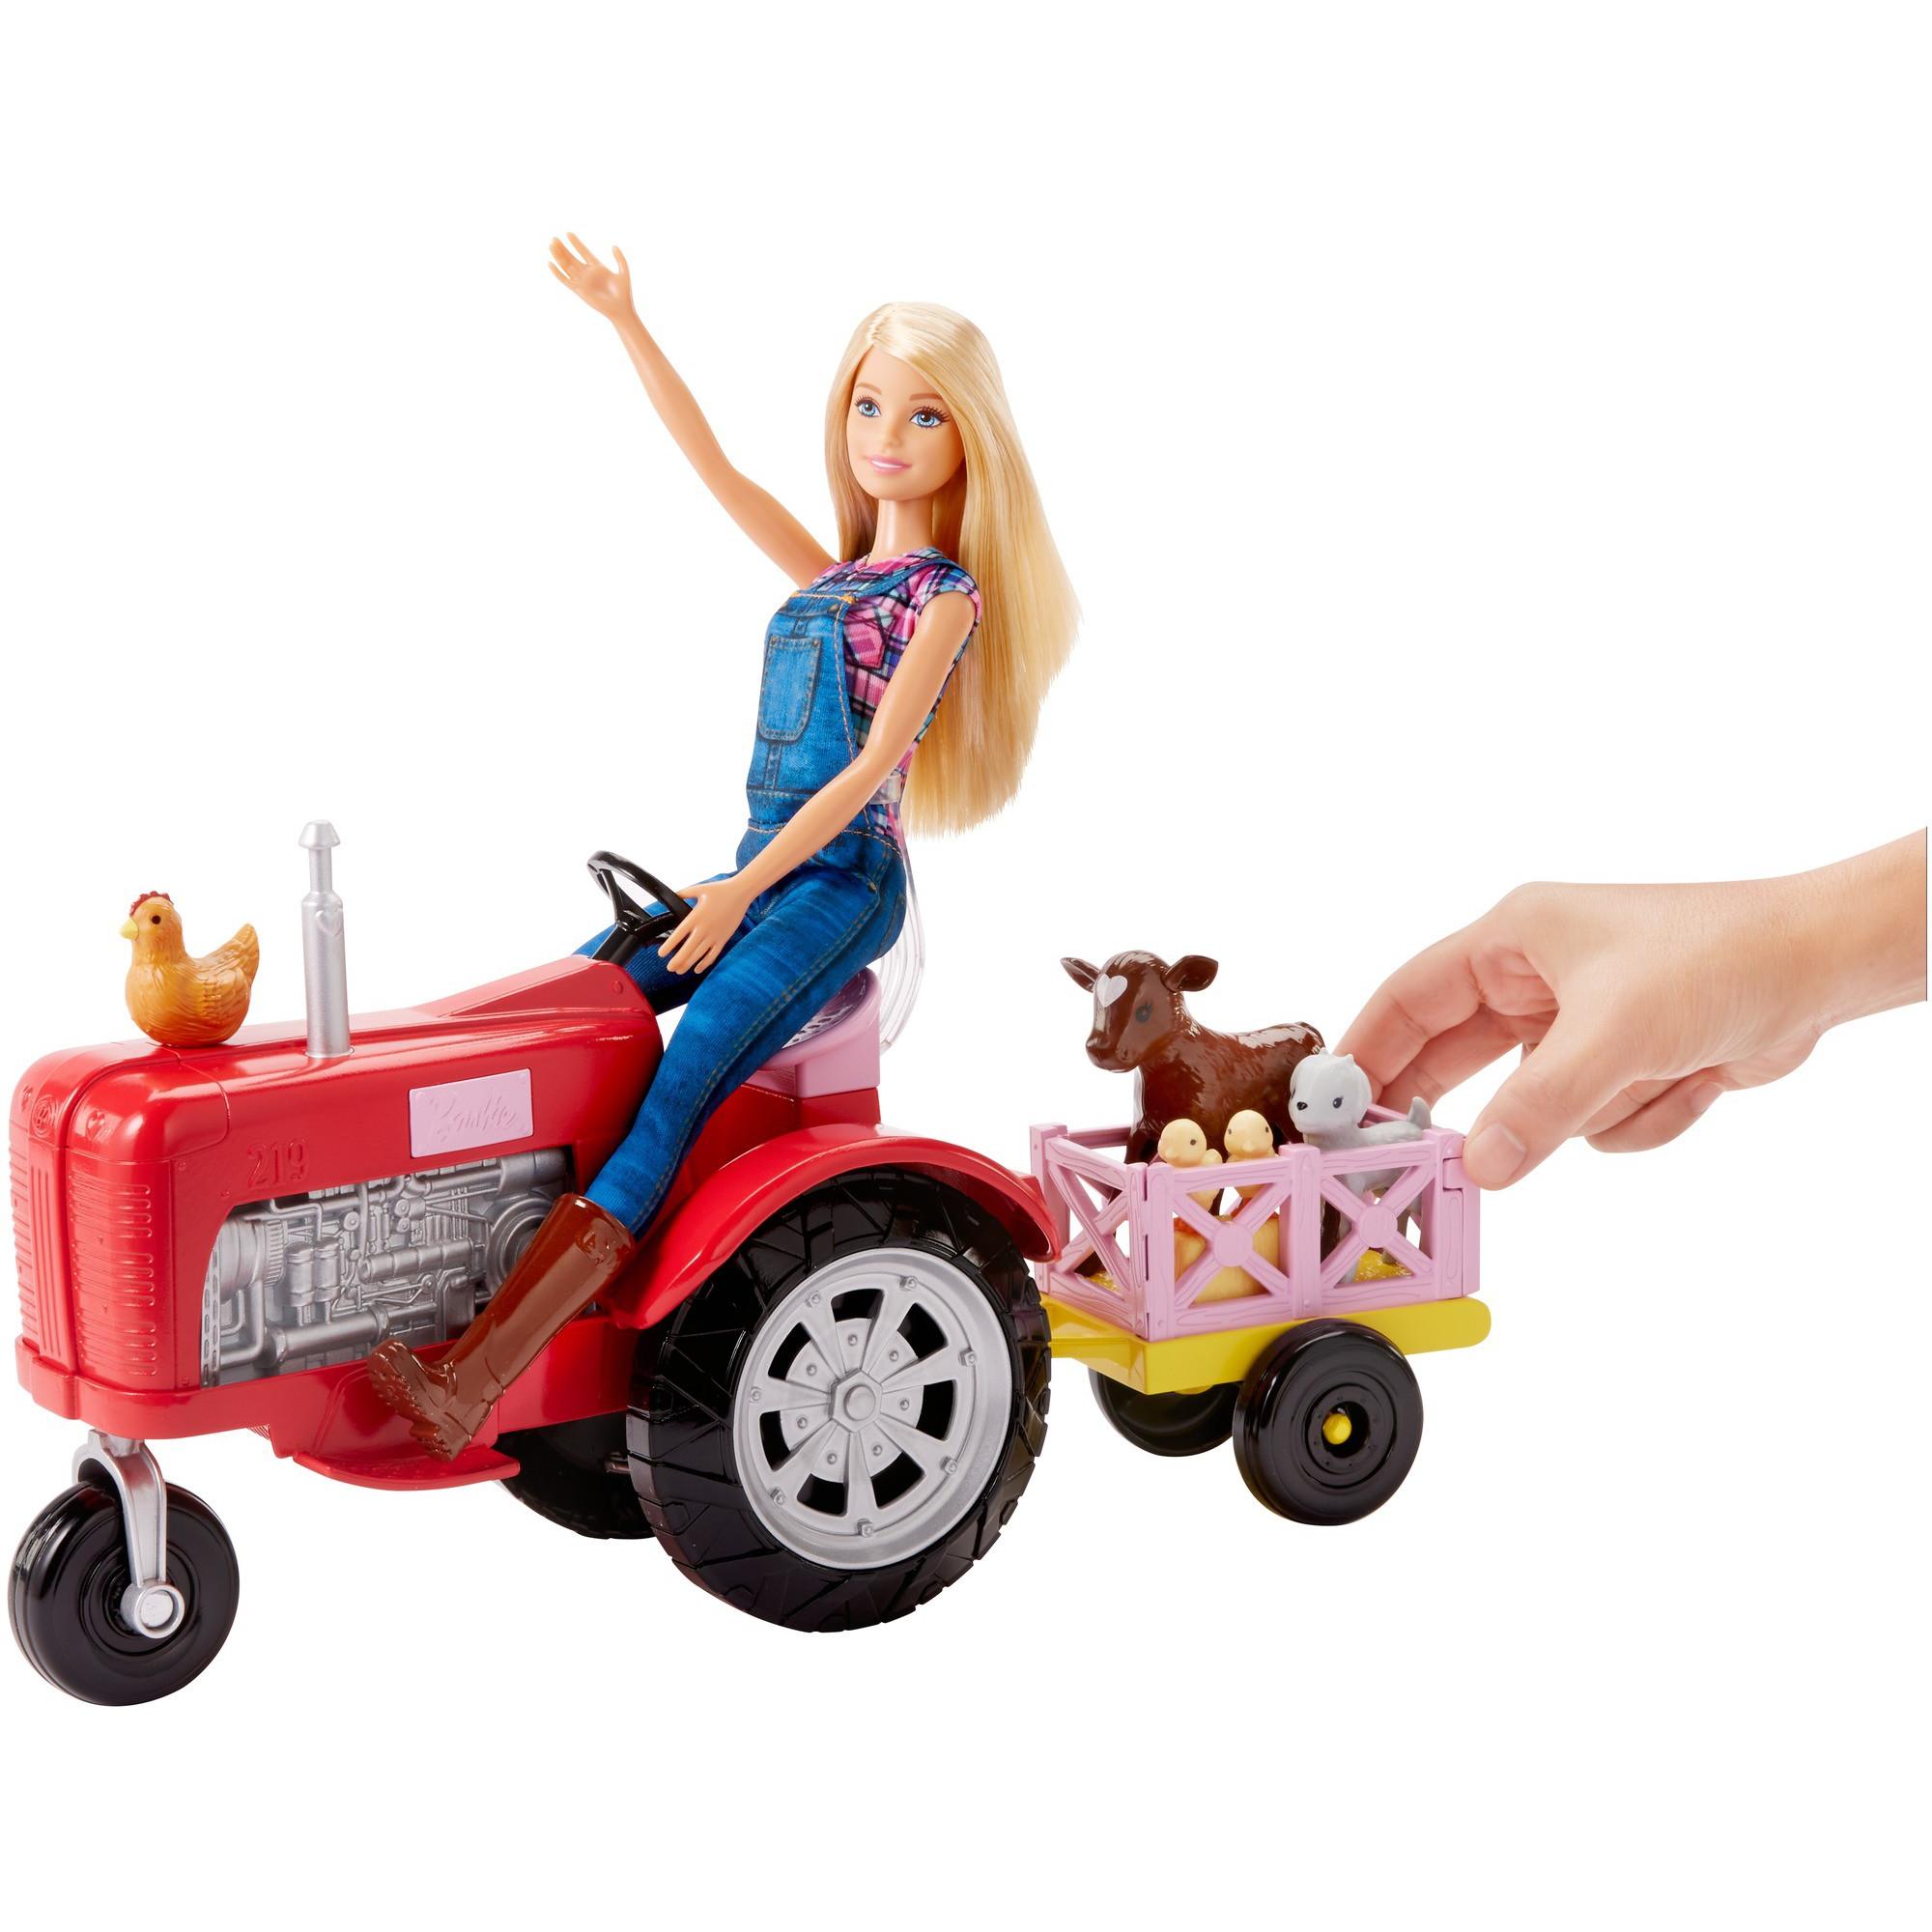 Barbie Careers Farmer Doll and Tractor with Themed Accessories - image 4 of 12